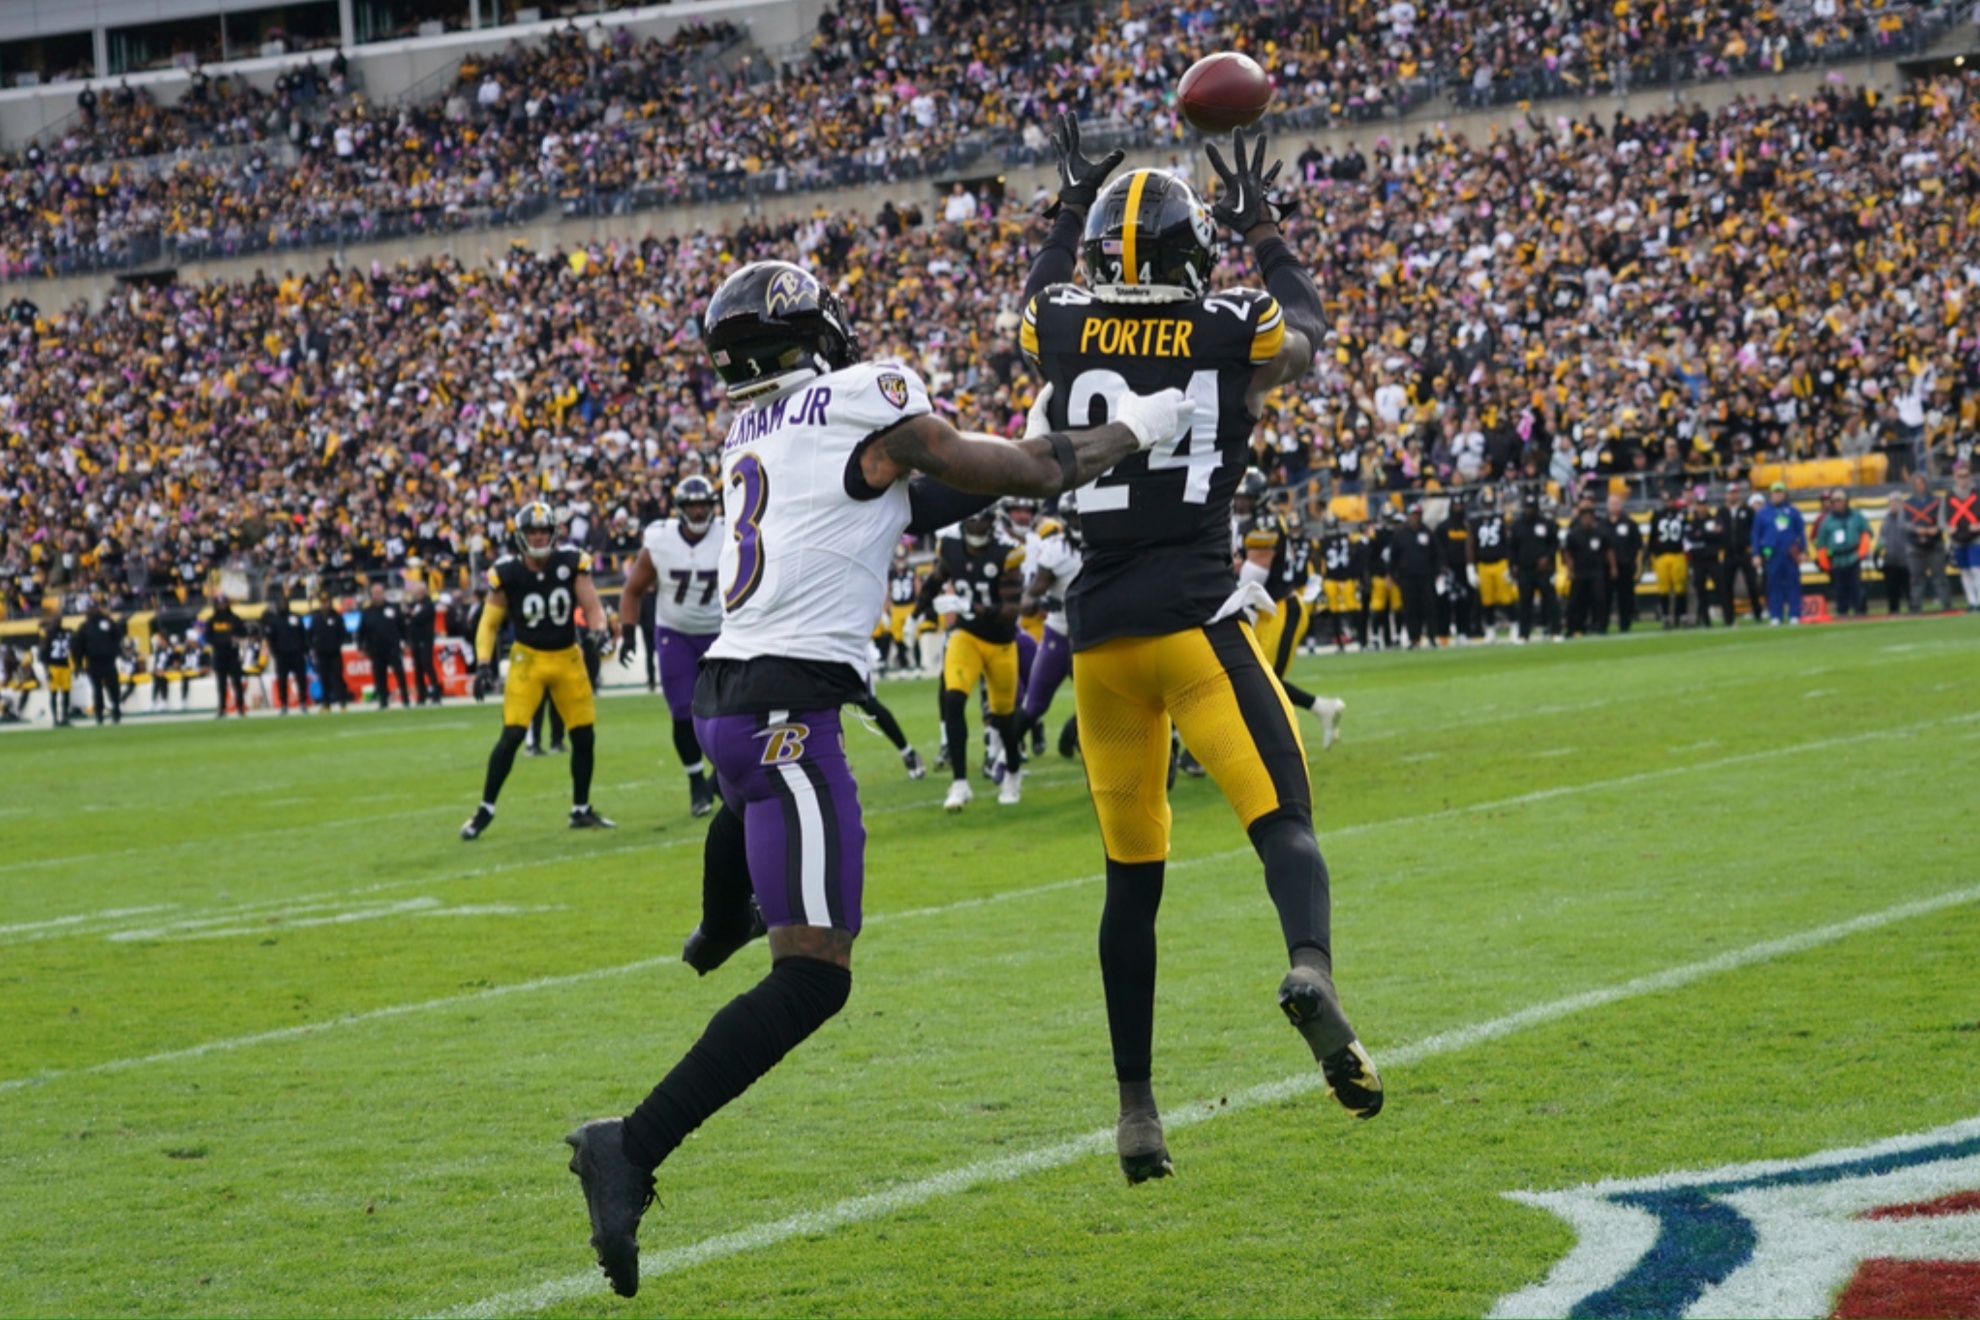 Steelers got a win against division rivals Ravens at home in Week 5